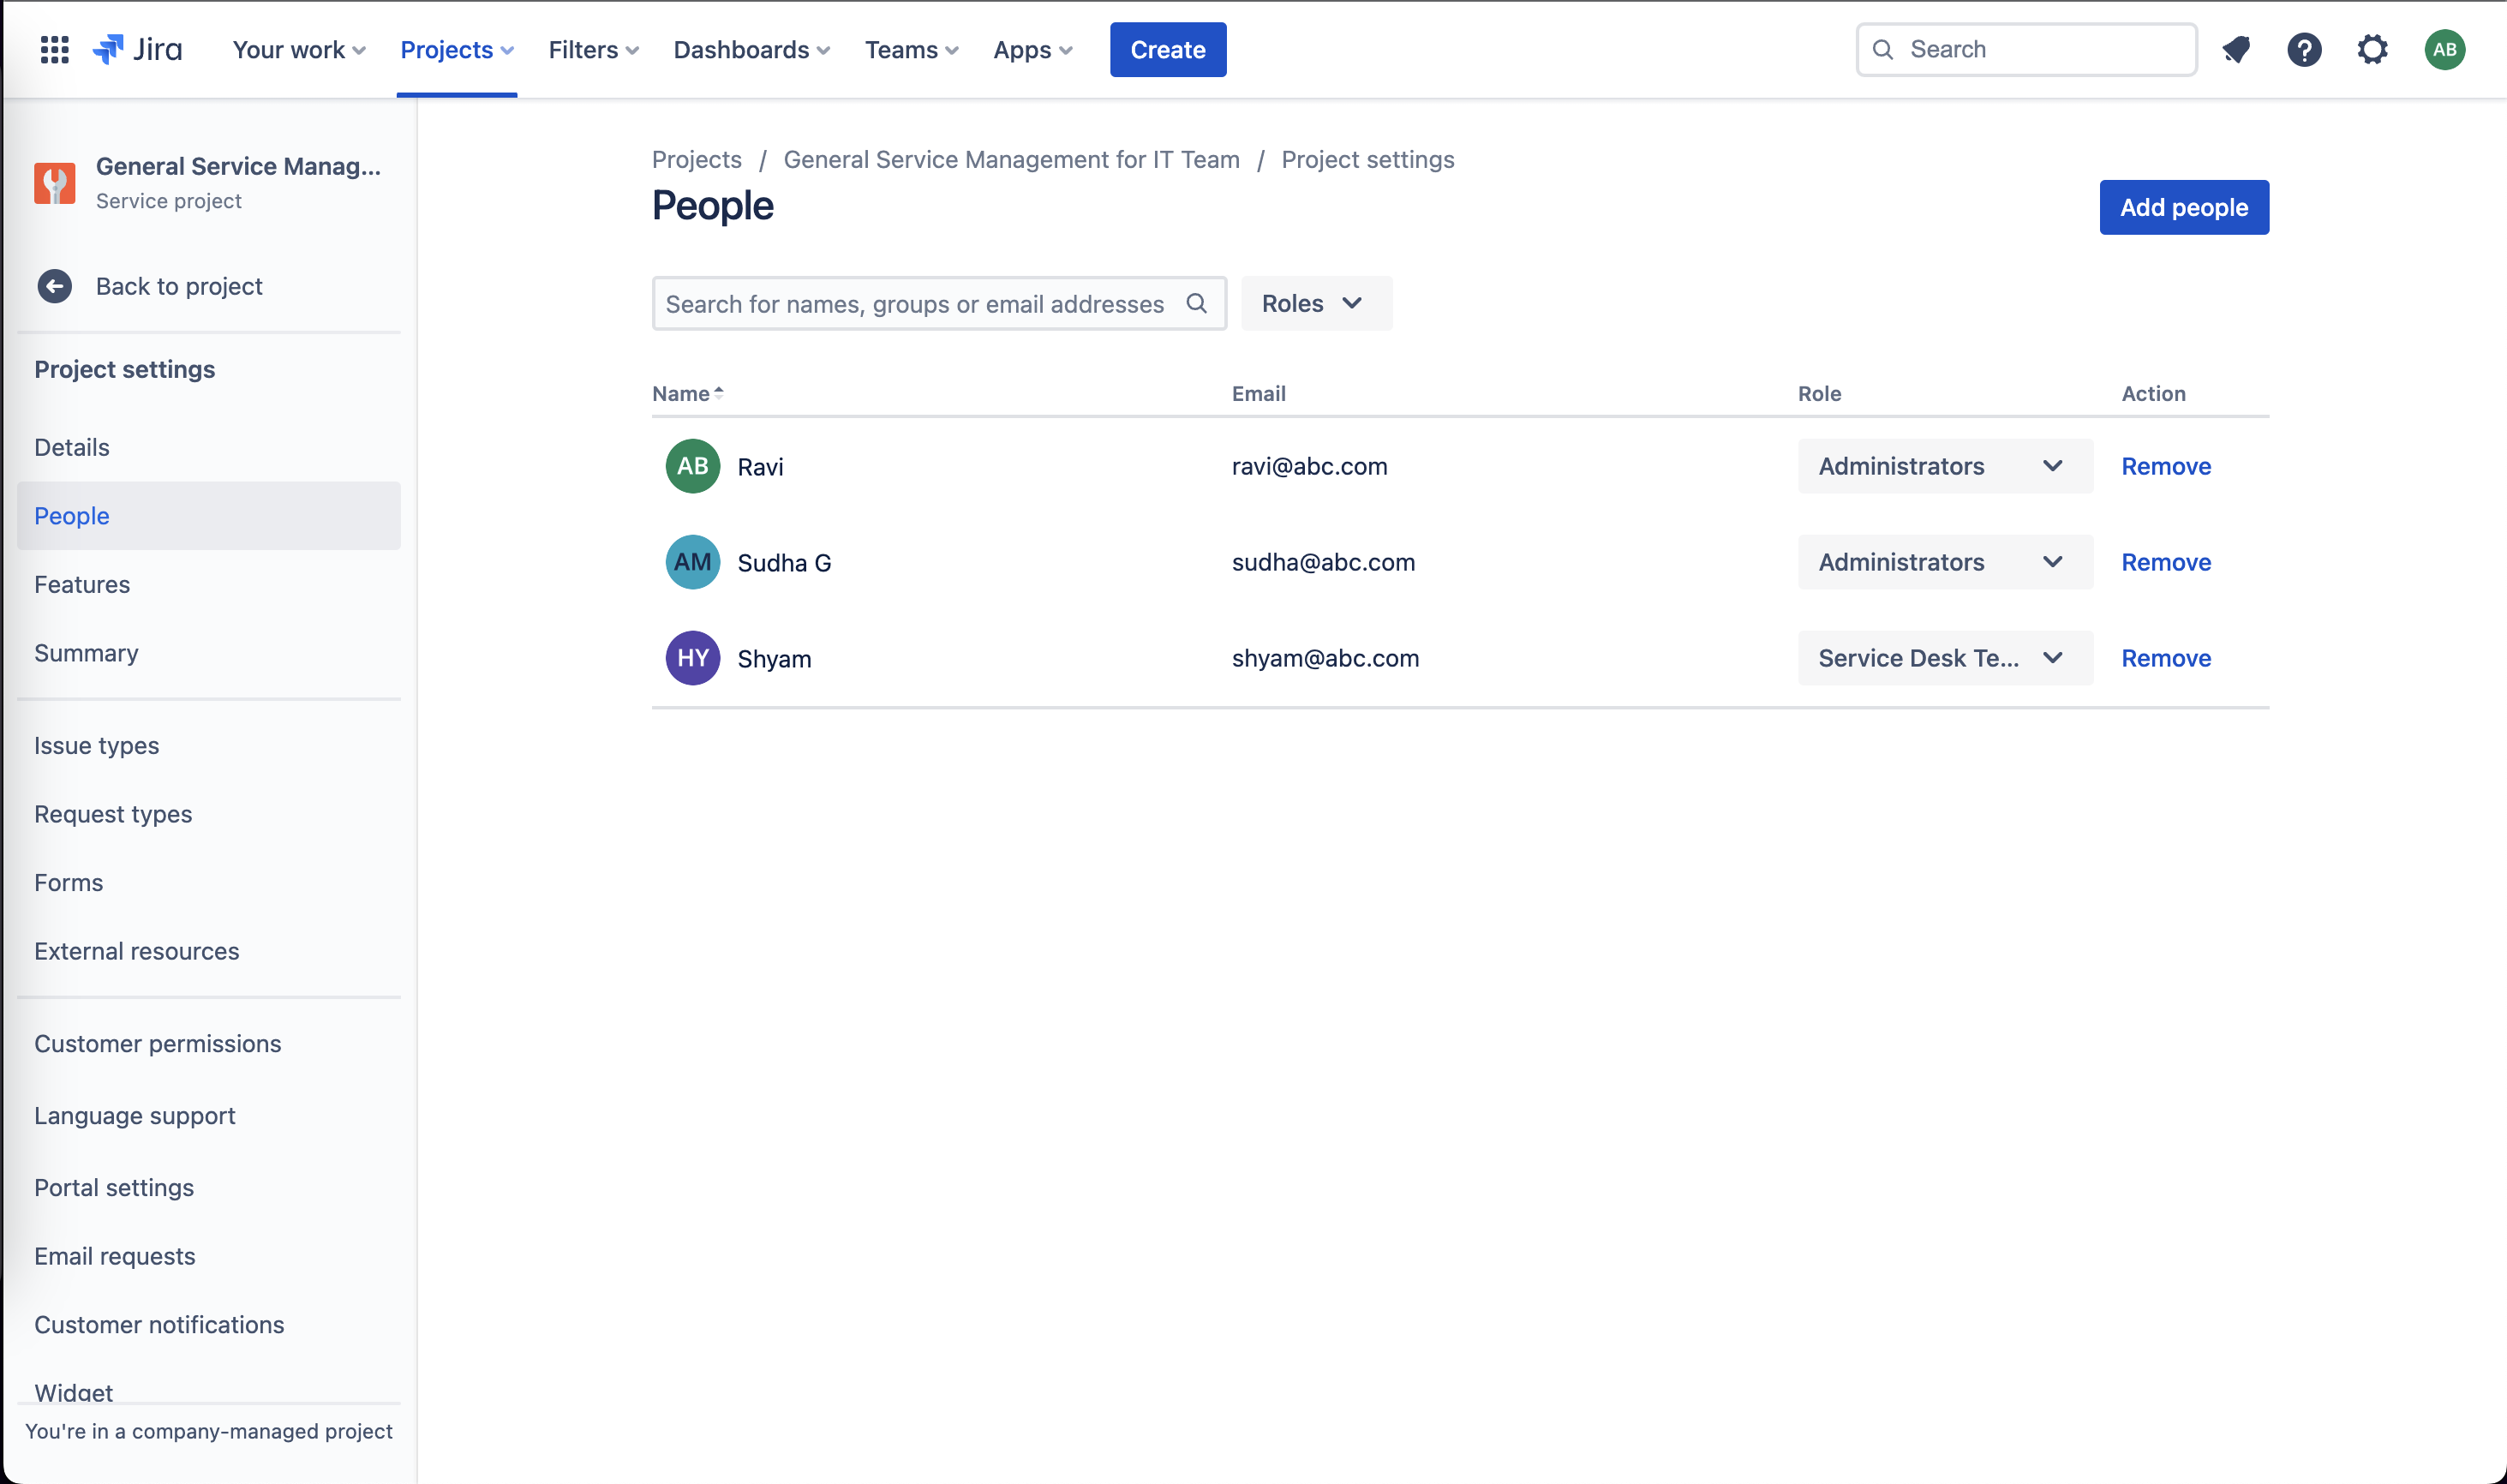 You can changes permissions for all your team members inside the User roles page in Jira Service Management.